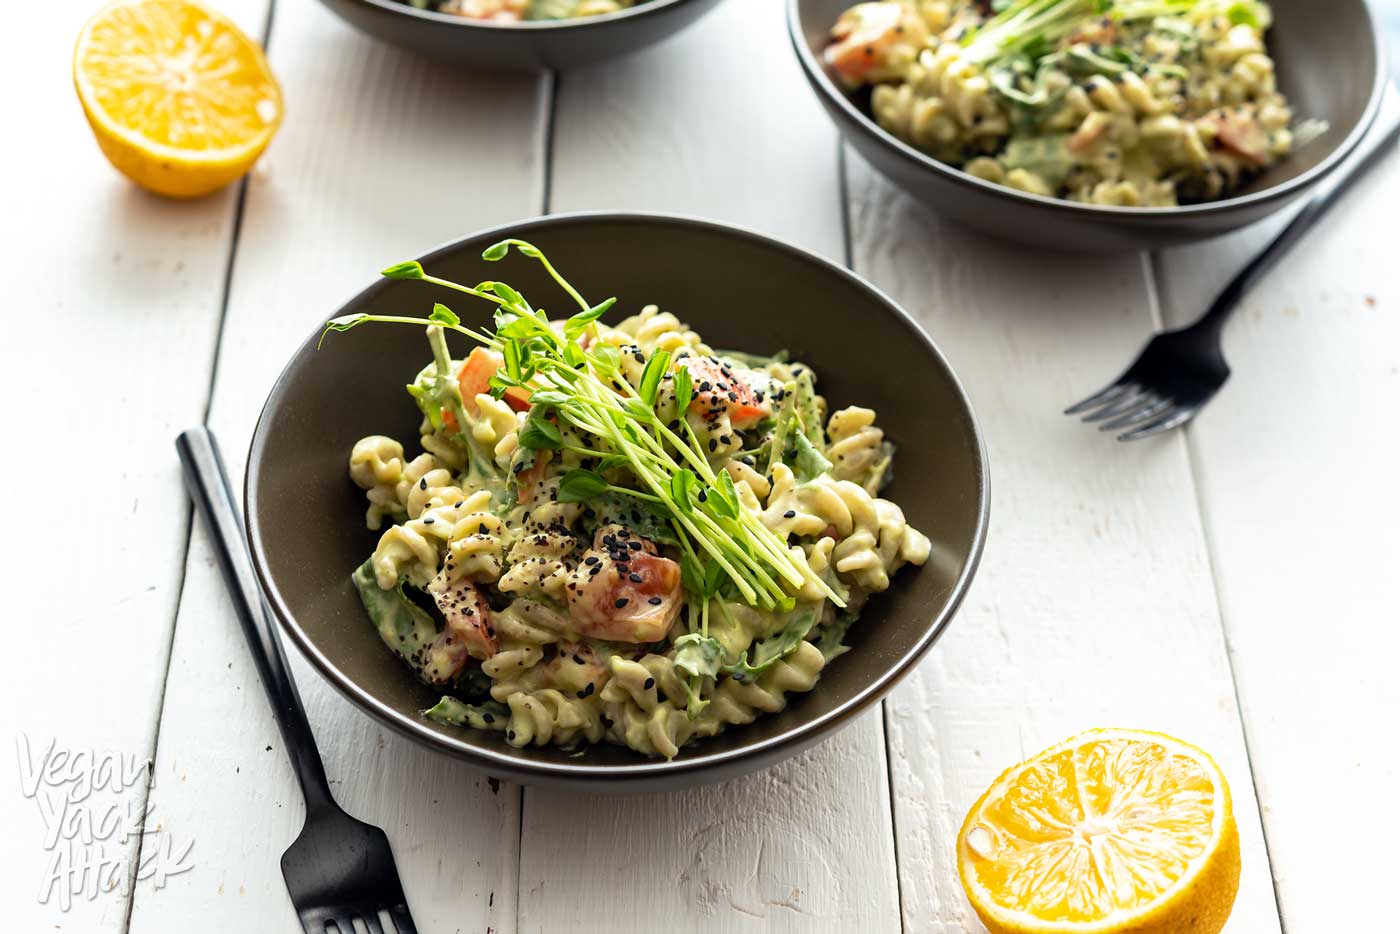 Here, creamy avocado and iron-rich tahini come together to make a delicious, super-simple, dish! This avocado tahini pasta is great for a quick dinner, or make-ahead lunch. Vegan, gluten-free, soy-free, and nut-free.